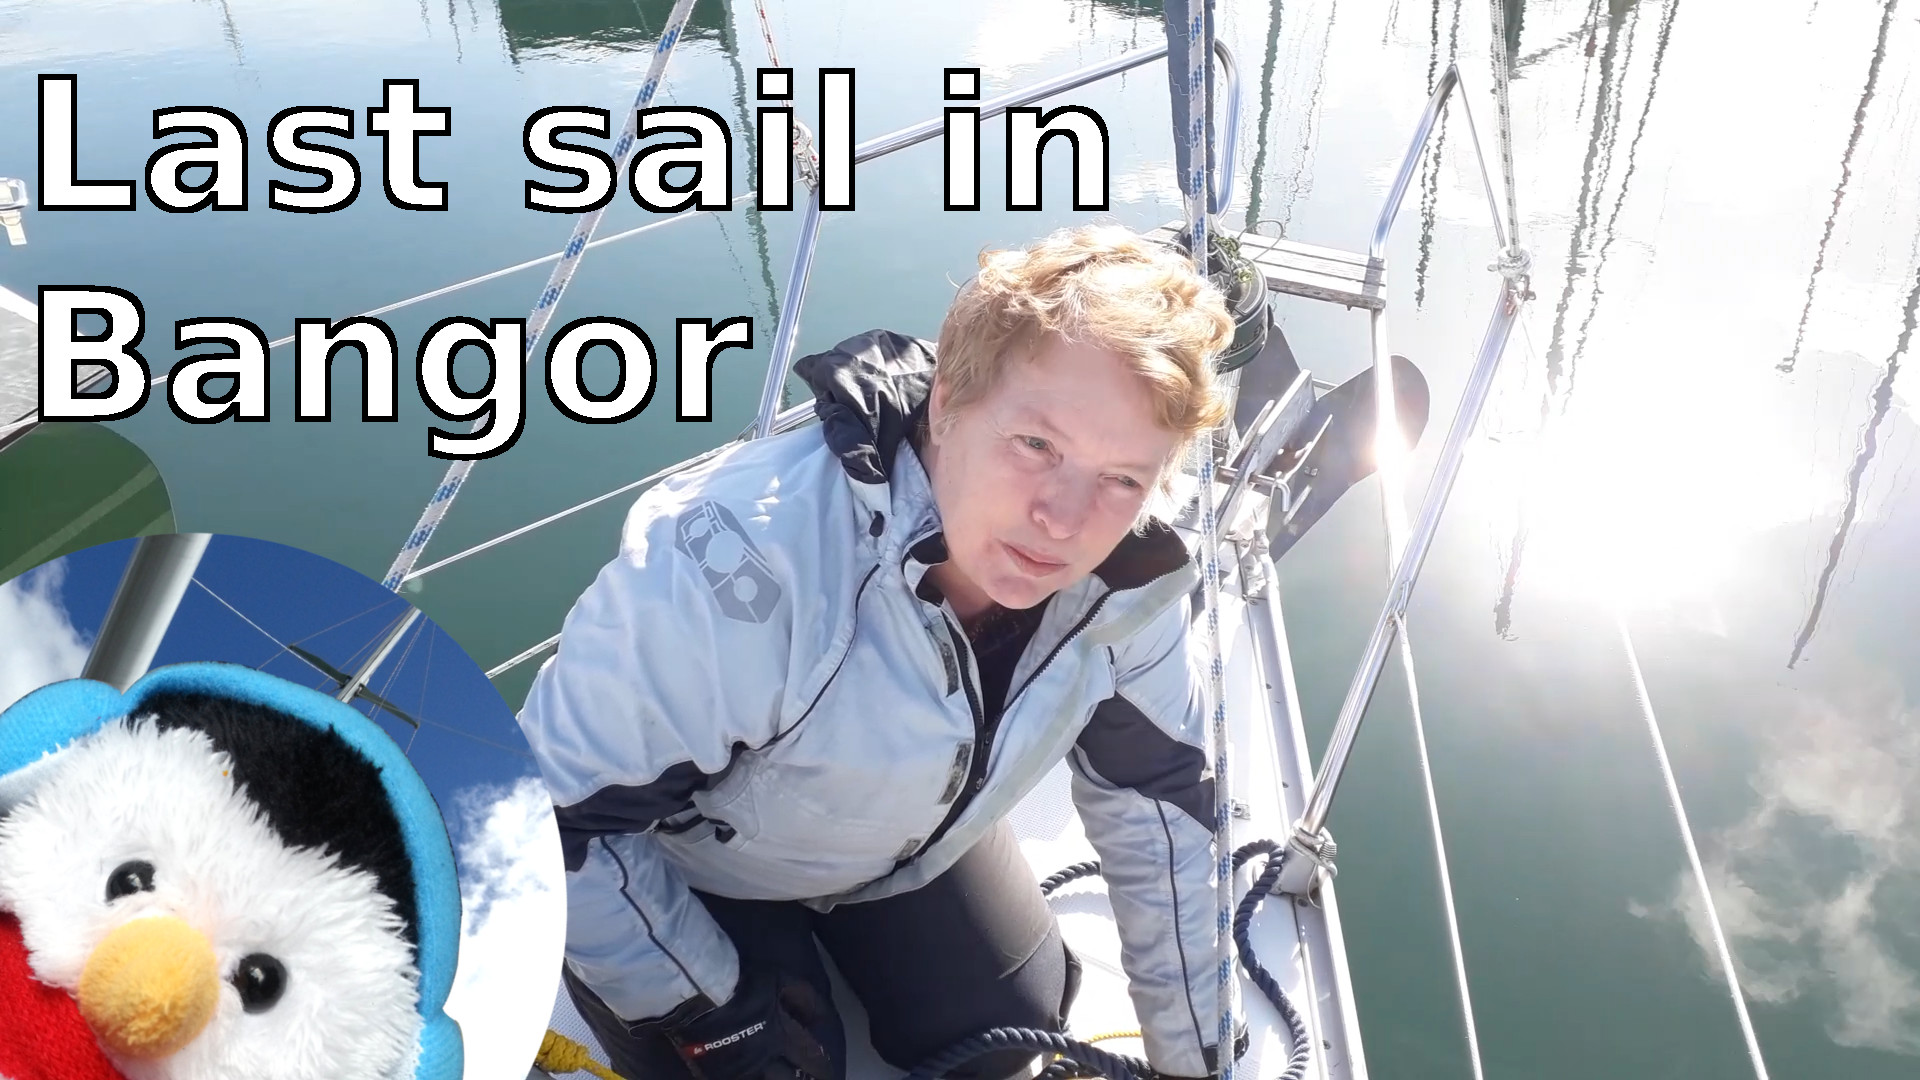 Watch our "Last Sail in Bangor" video and add comments etc.